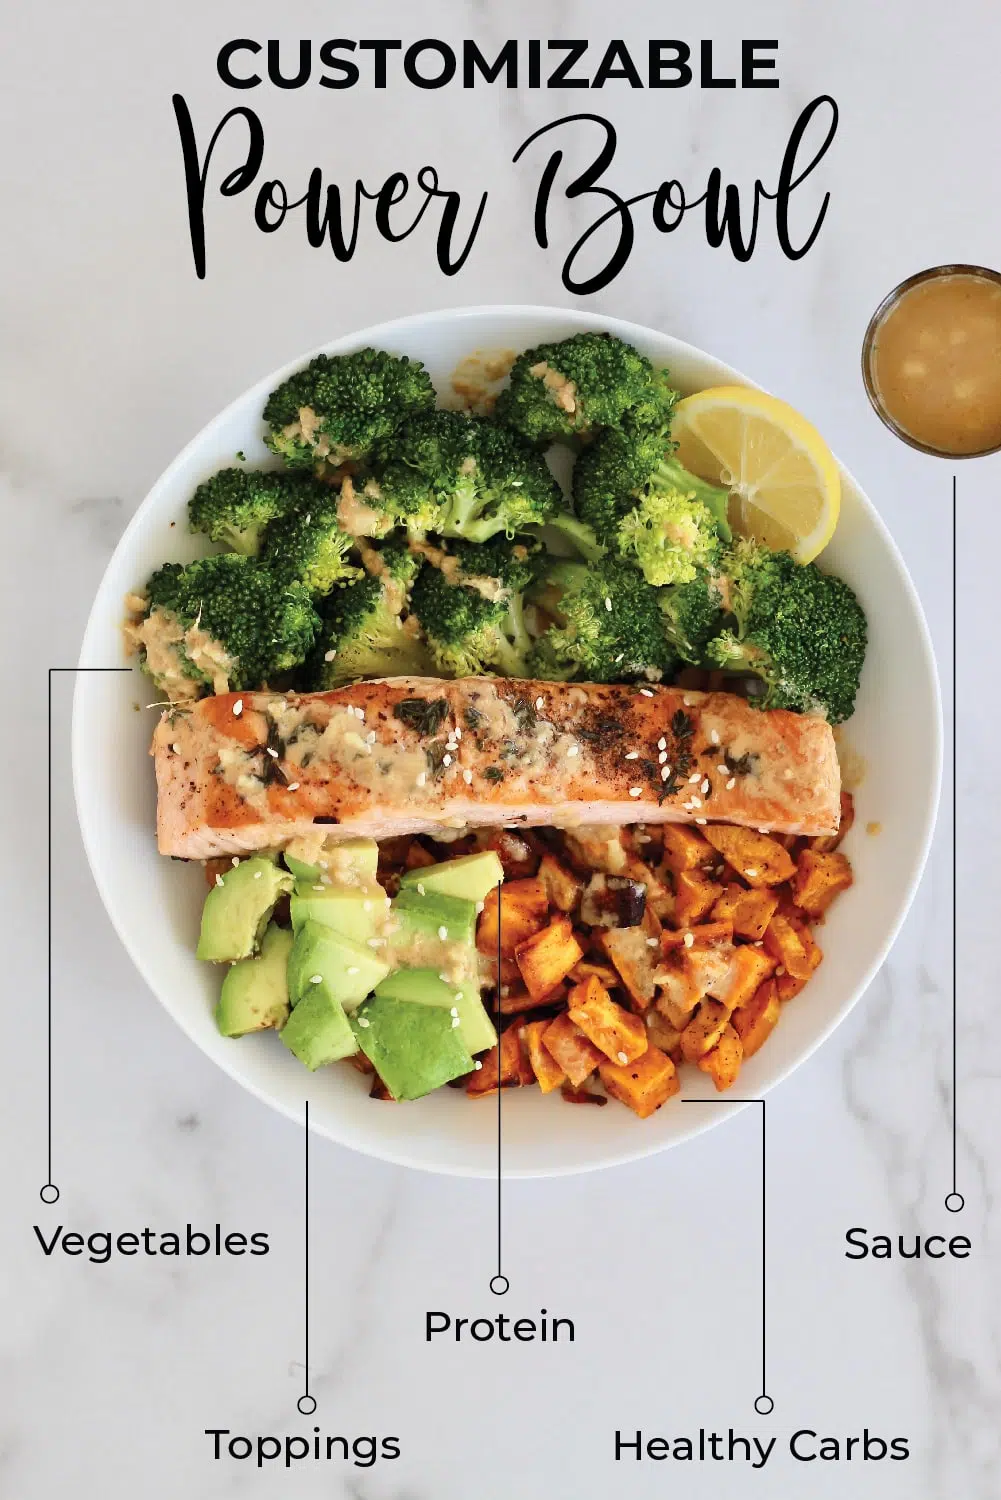 This customizable power bowl is filled with delicious, healthy ingredients like grains, veggies, and lean protein to provide long-lasting energy throughout the day. Perfect for meal prep! #powerbowl  #mealprep #customize #CheerfulChoices